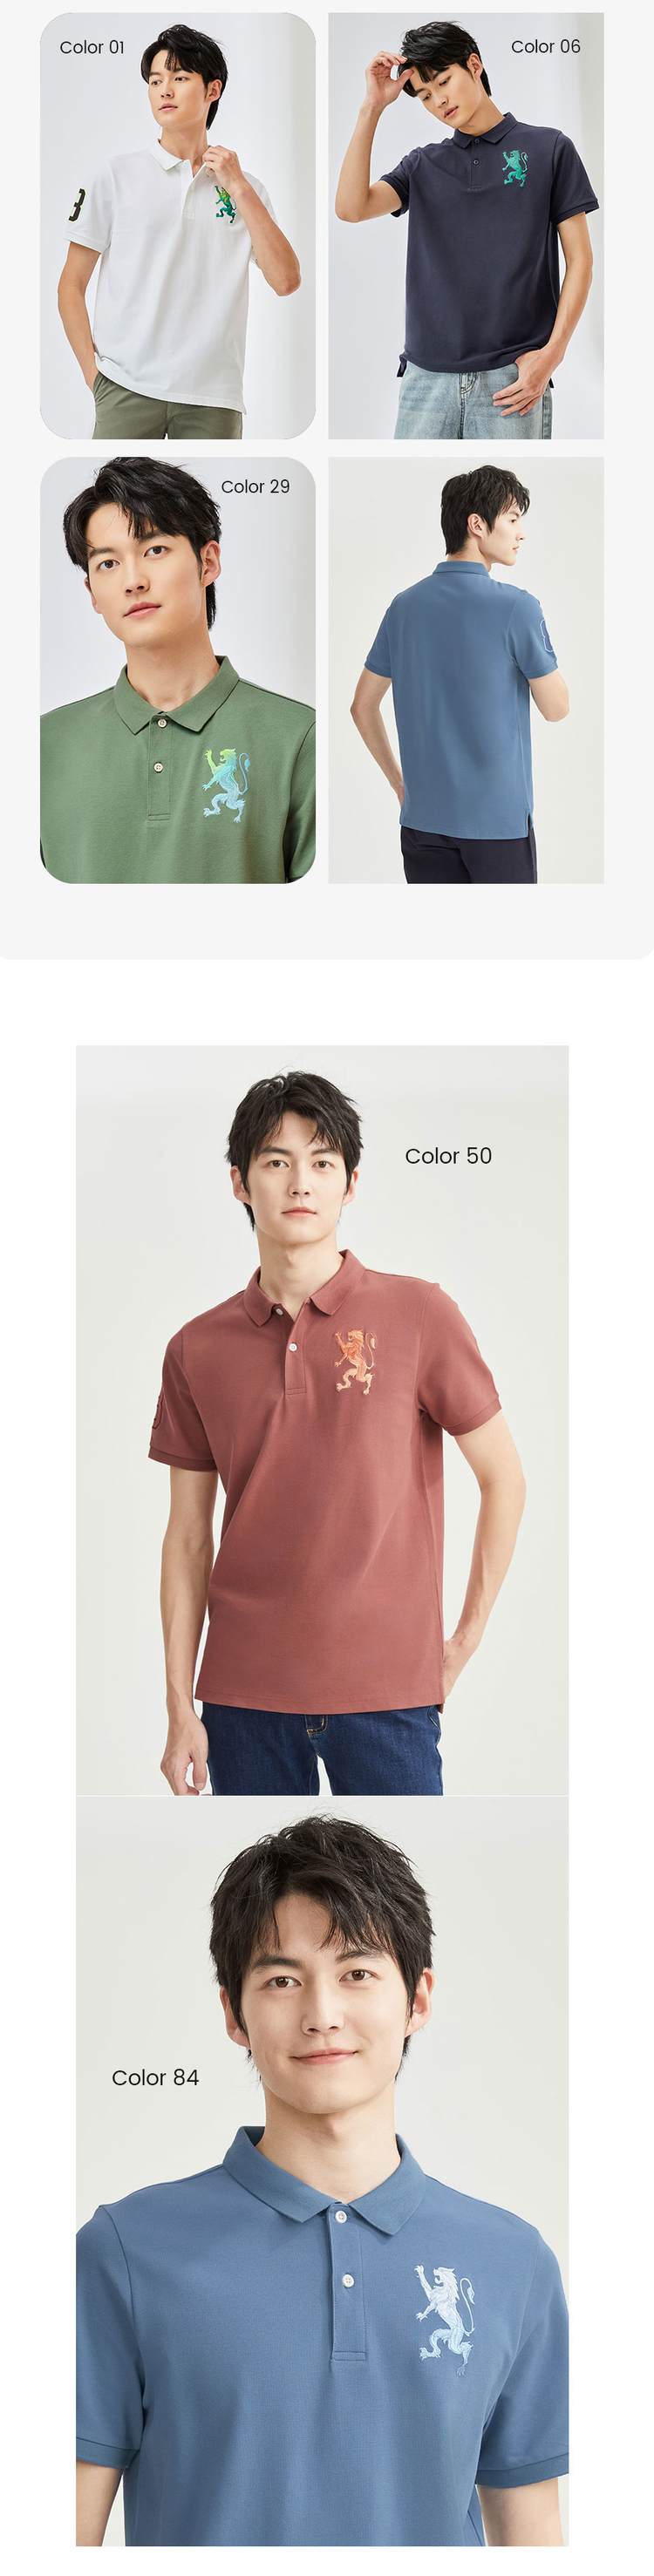 Hotsale Factory Soft Cotton Long Sleeve Stitching Color Fashion Silk-Like  Hand Feeling Mercerized Cotton Polo T Shirt Made in China - China Polo  Shirt Suppliers Fashion and Long Sleeve Polo Shirts for